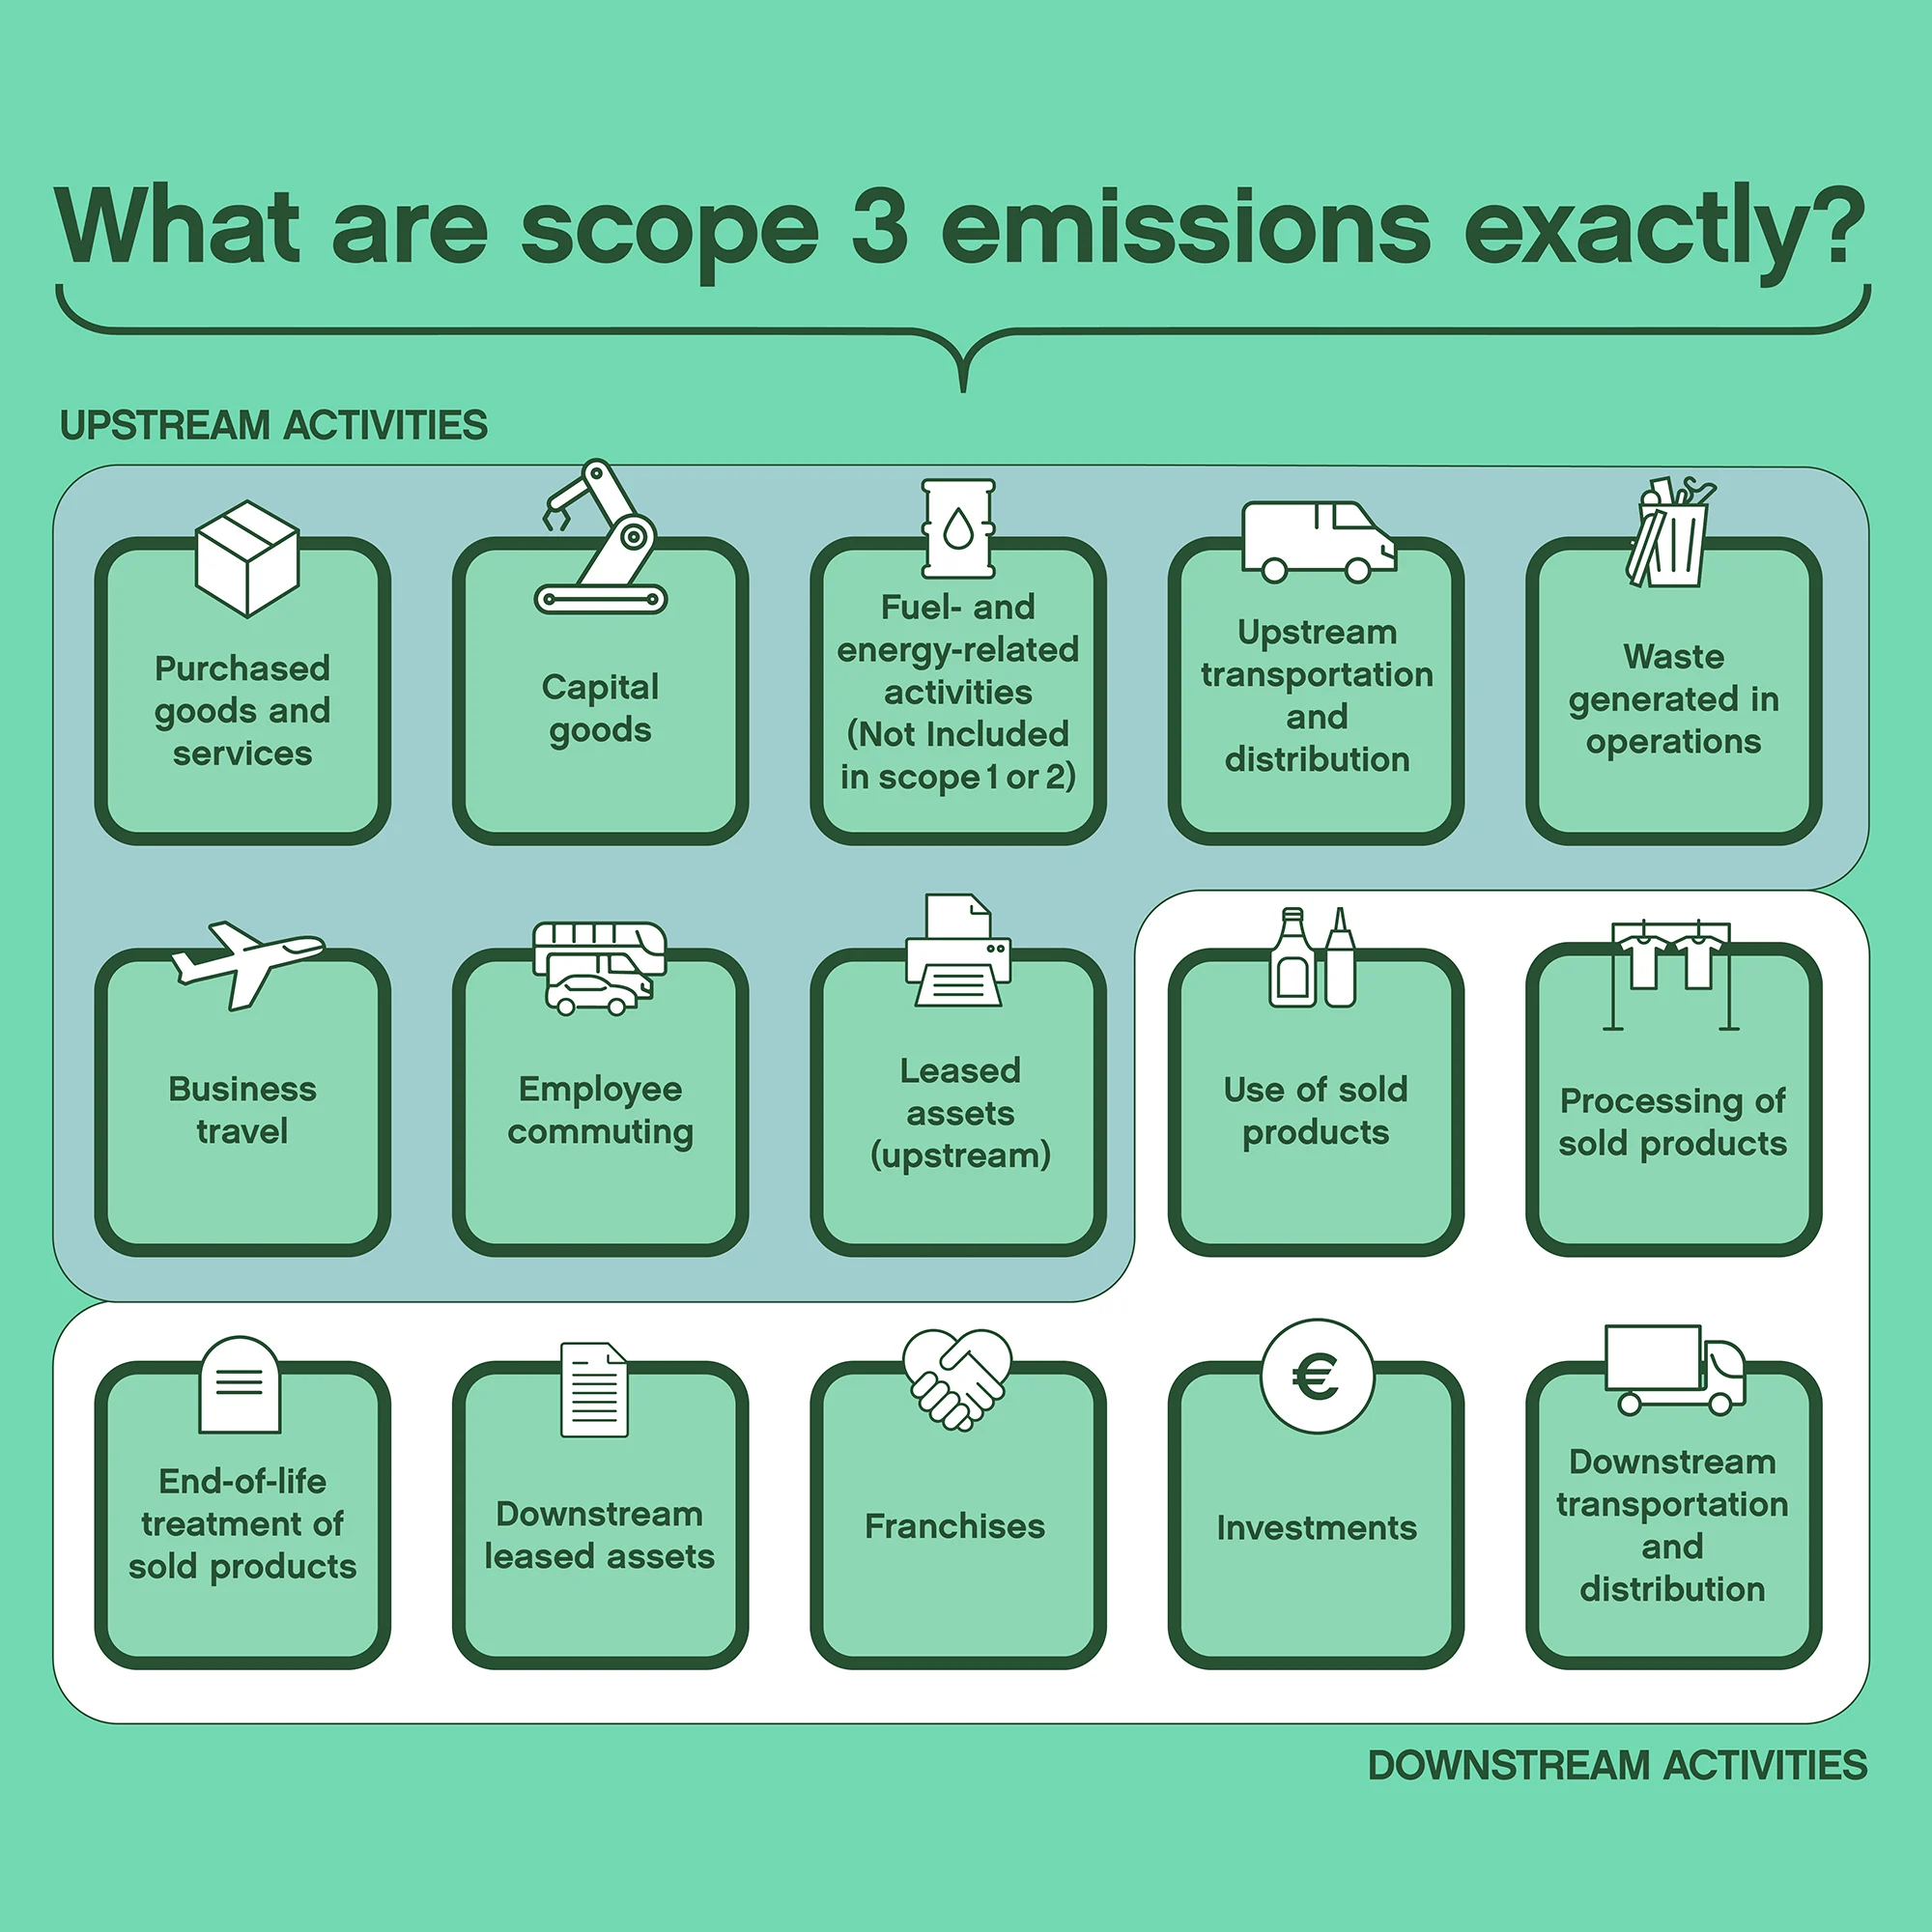 What are scope 3 emissions exactly?